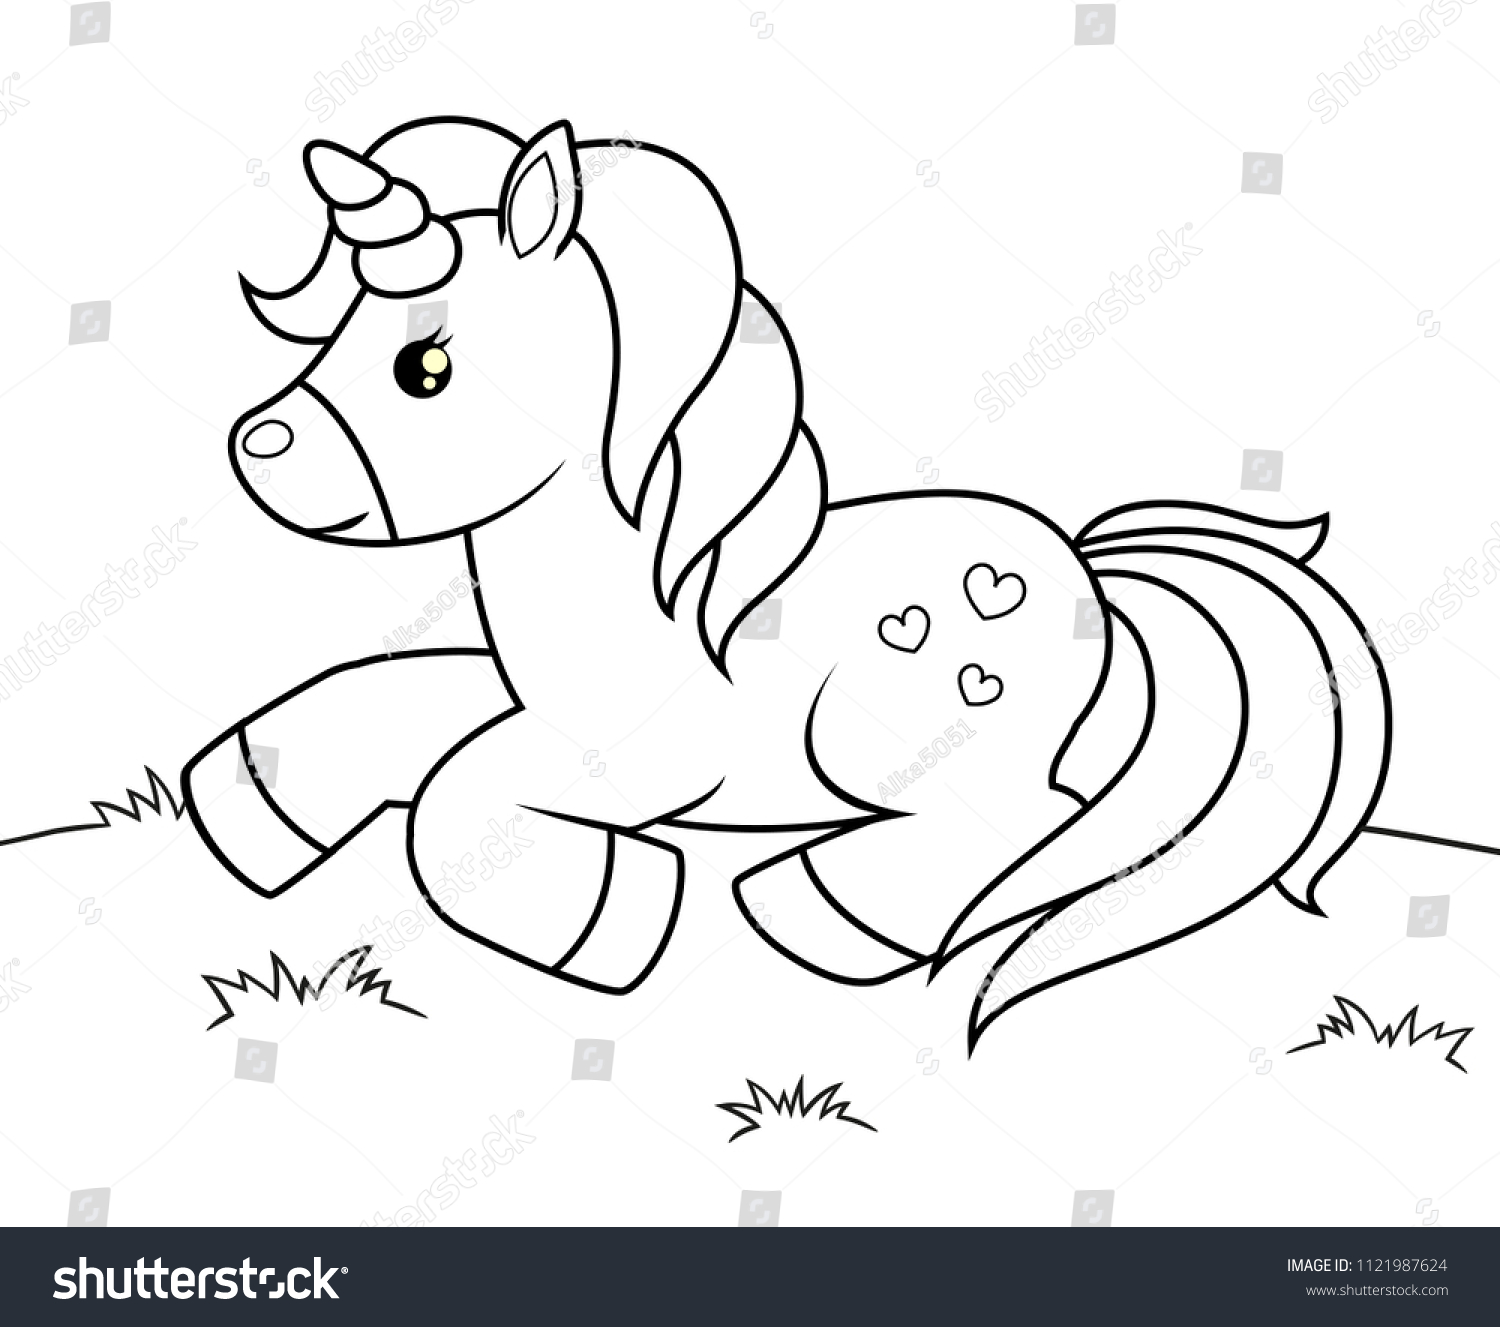 Coloring book Images, Stock Photos & Vectors   Shutterstock